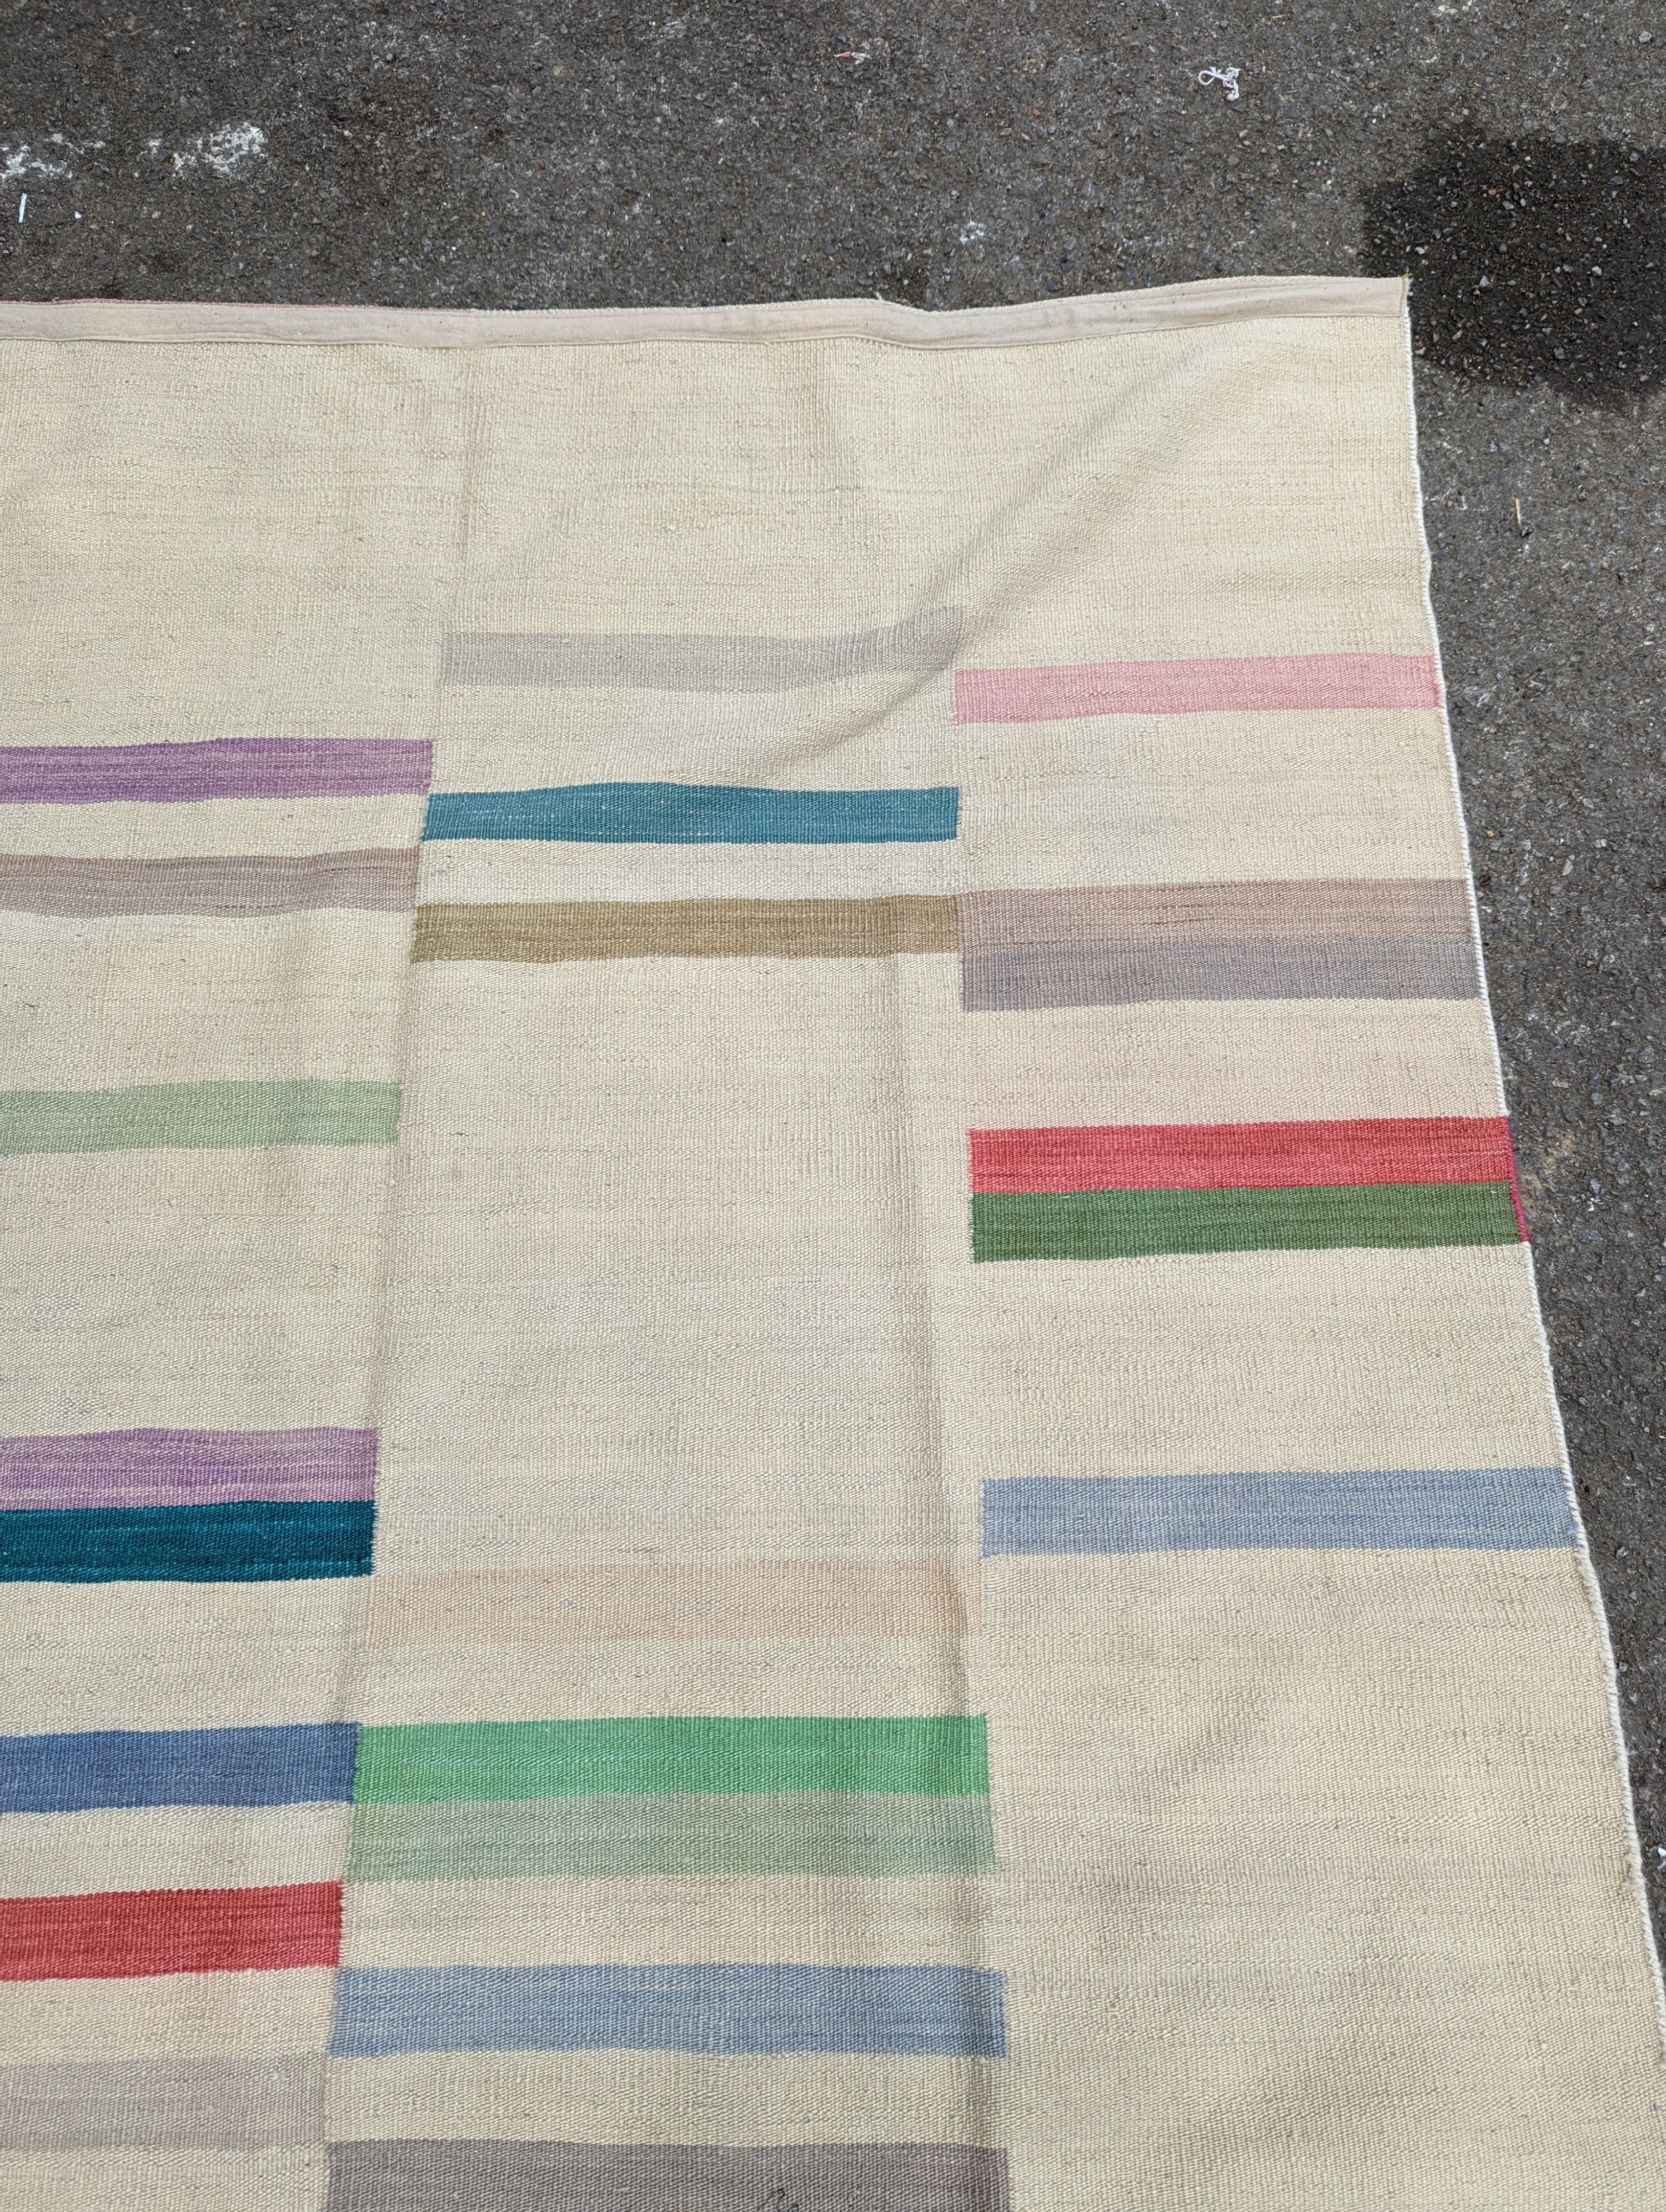 A contemporary Paul Smith inspired Kilim carpet, approx. 200 x 120